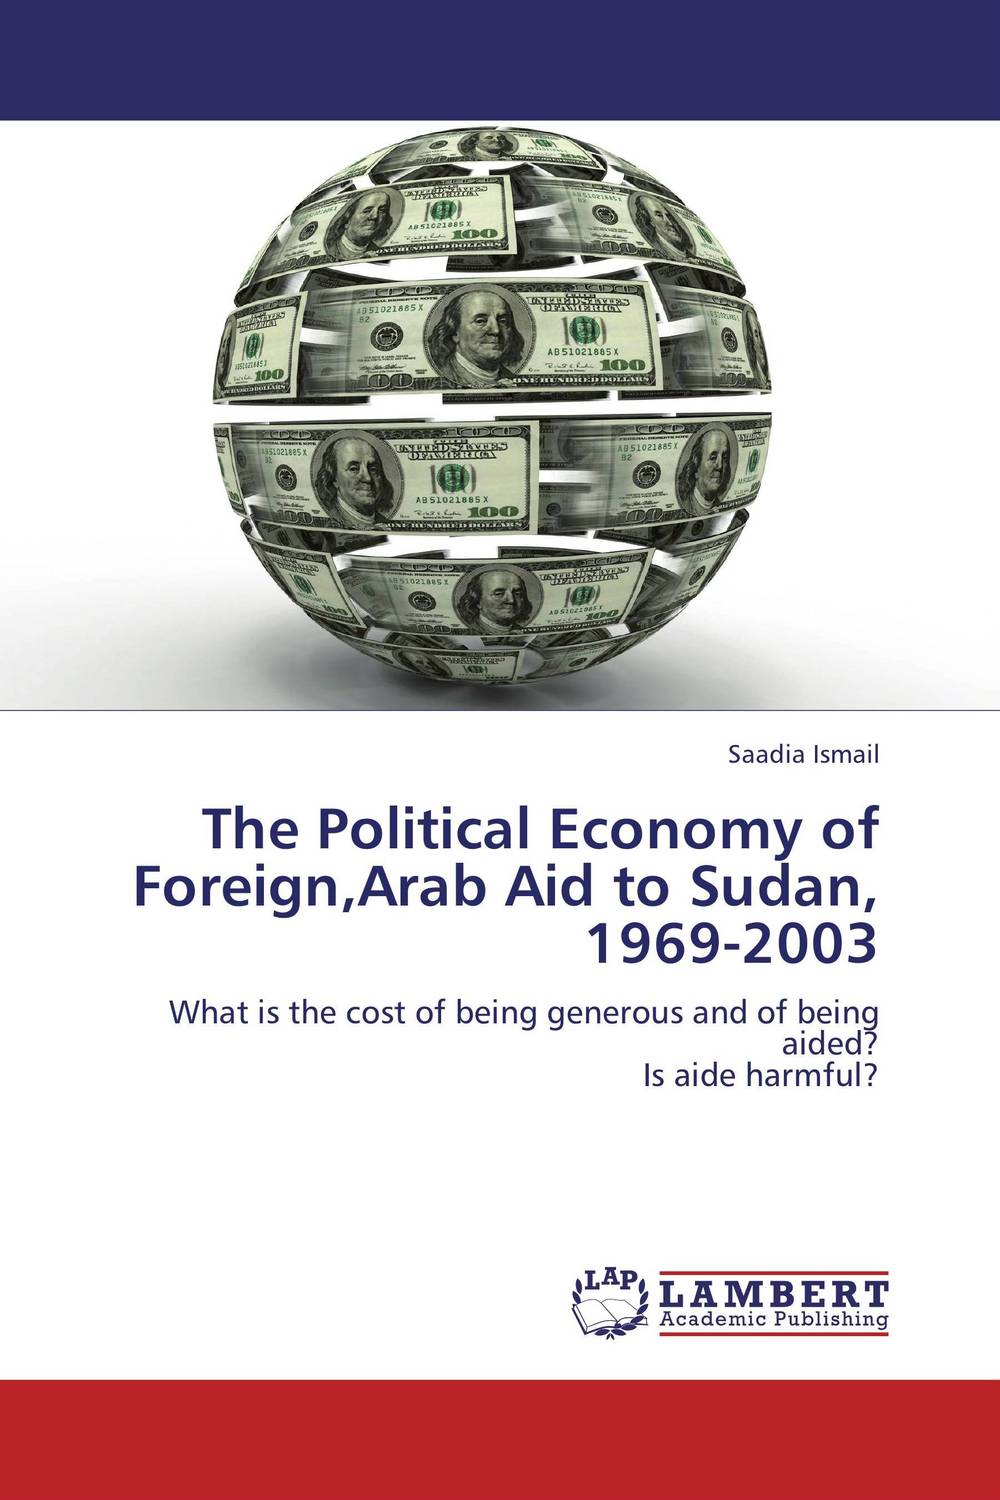 The Political Economy of Foreign,Arab Aid to Sudan, 1969-2003